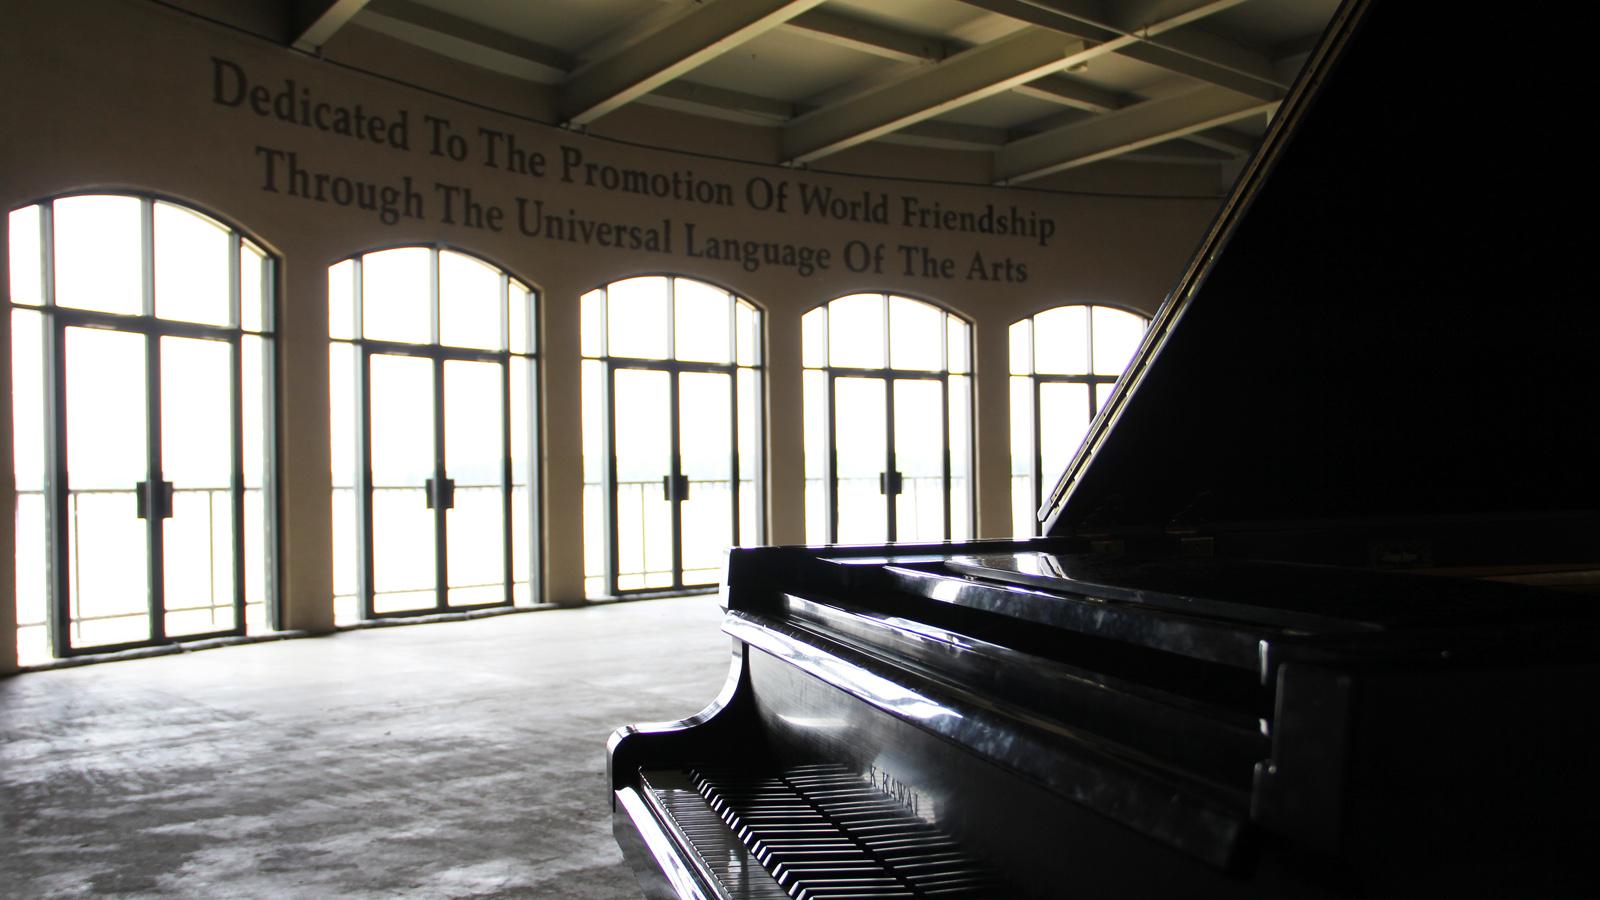 The Kresge Auditorium stage, bearing the inscription "Dedicated to the promotion of world friendship through the universal language of the arts."